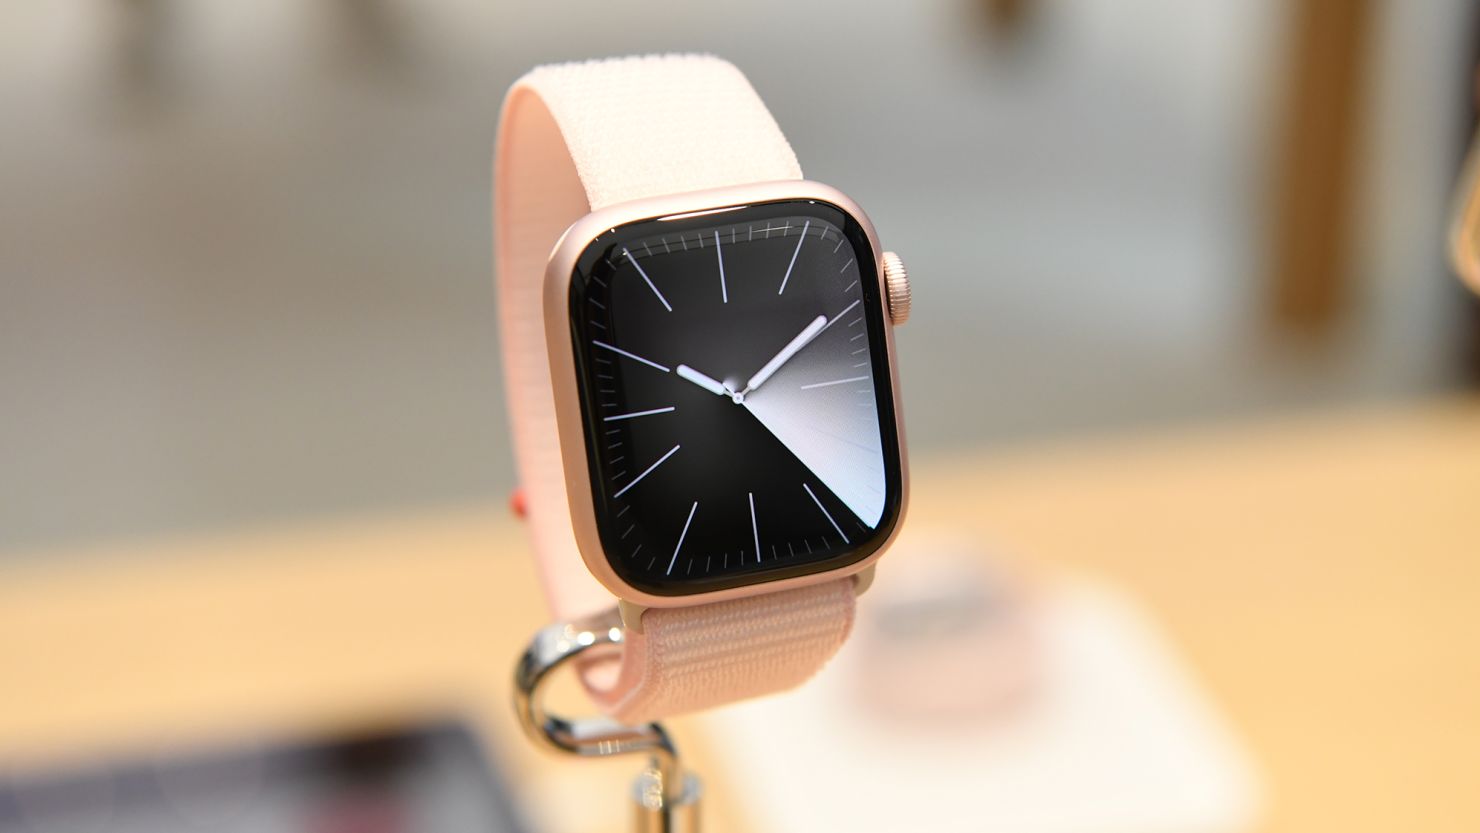 SYDNEY, AUSTRALIA - SEPTEMBER 22: The new Apple Watch carbon neutral version at the Australian release of the latest iPhone and Apple Watch models at the Apple Store on September 22, 2023 in Sydney, Australia. Apple launched its lineup of the latest iPhone 15 versions as well as other product upgrades such as the Apple Watch Series 9 and Apple Watch Ultra 2 featuring new design, improved performance and new materials.  (Photo by James D. Morgan/Getty Images)